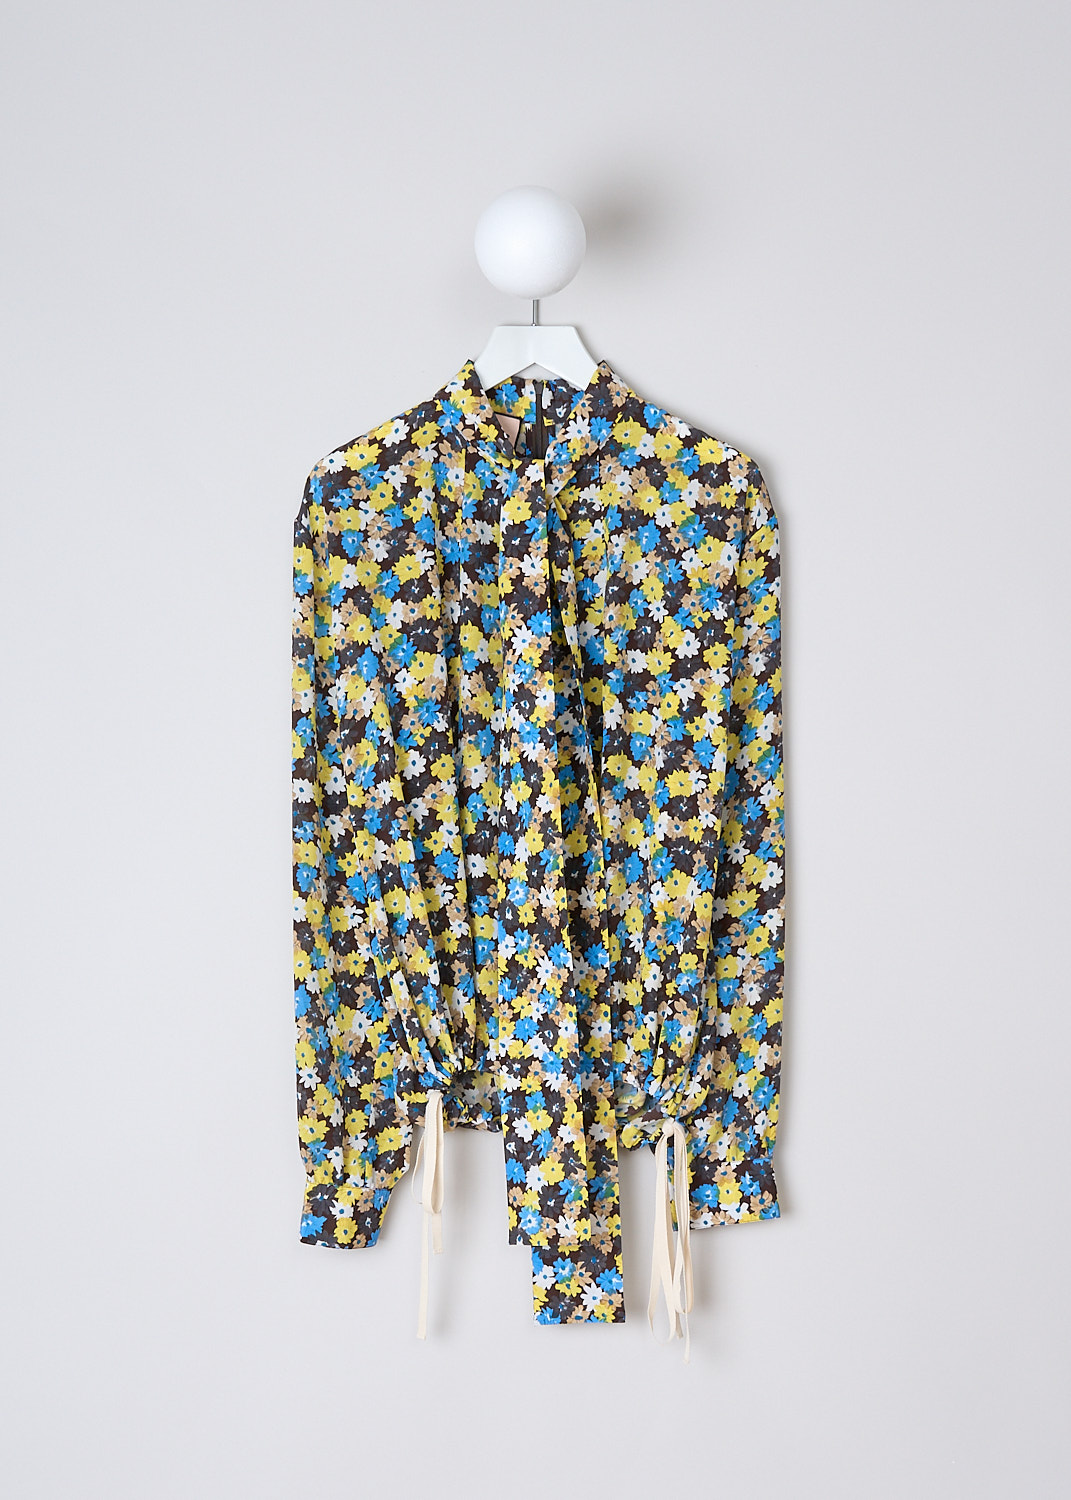 PLAN C, DAISY BOUQUET CRÊPE DE CHINE BLOUSE, CMCAD55K00_TS011_FIY04, Yellow, Print, Blue, Front, This long sleeve Crêpe de Chine blouse has an all-over Daisy Bouquet print. The blouse has a bow-tie neckline. An inverted pleats runs vertically down the front. The long sleeves have buttoned cuffs. The blouse has a hemline with drawstrings on either side. In the back of the neck, the blouse has a concealed centre zip.


